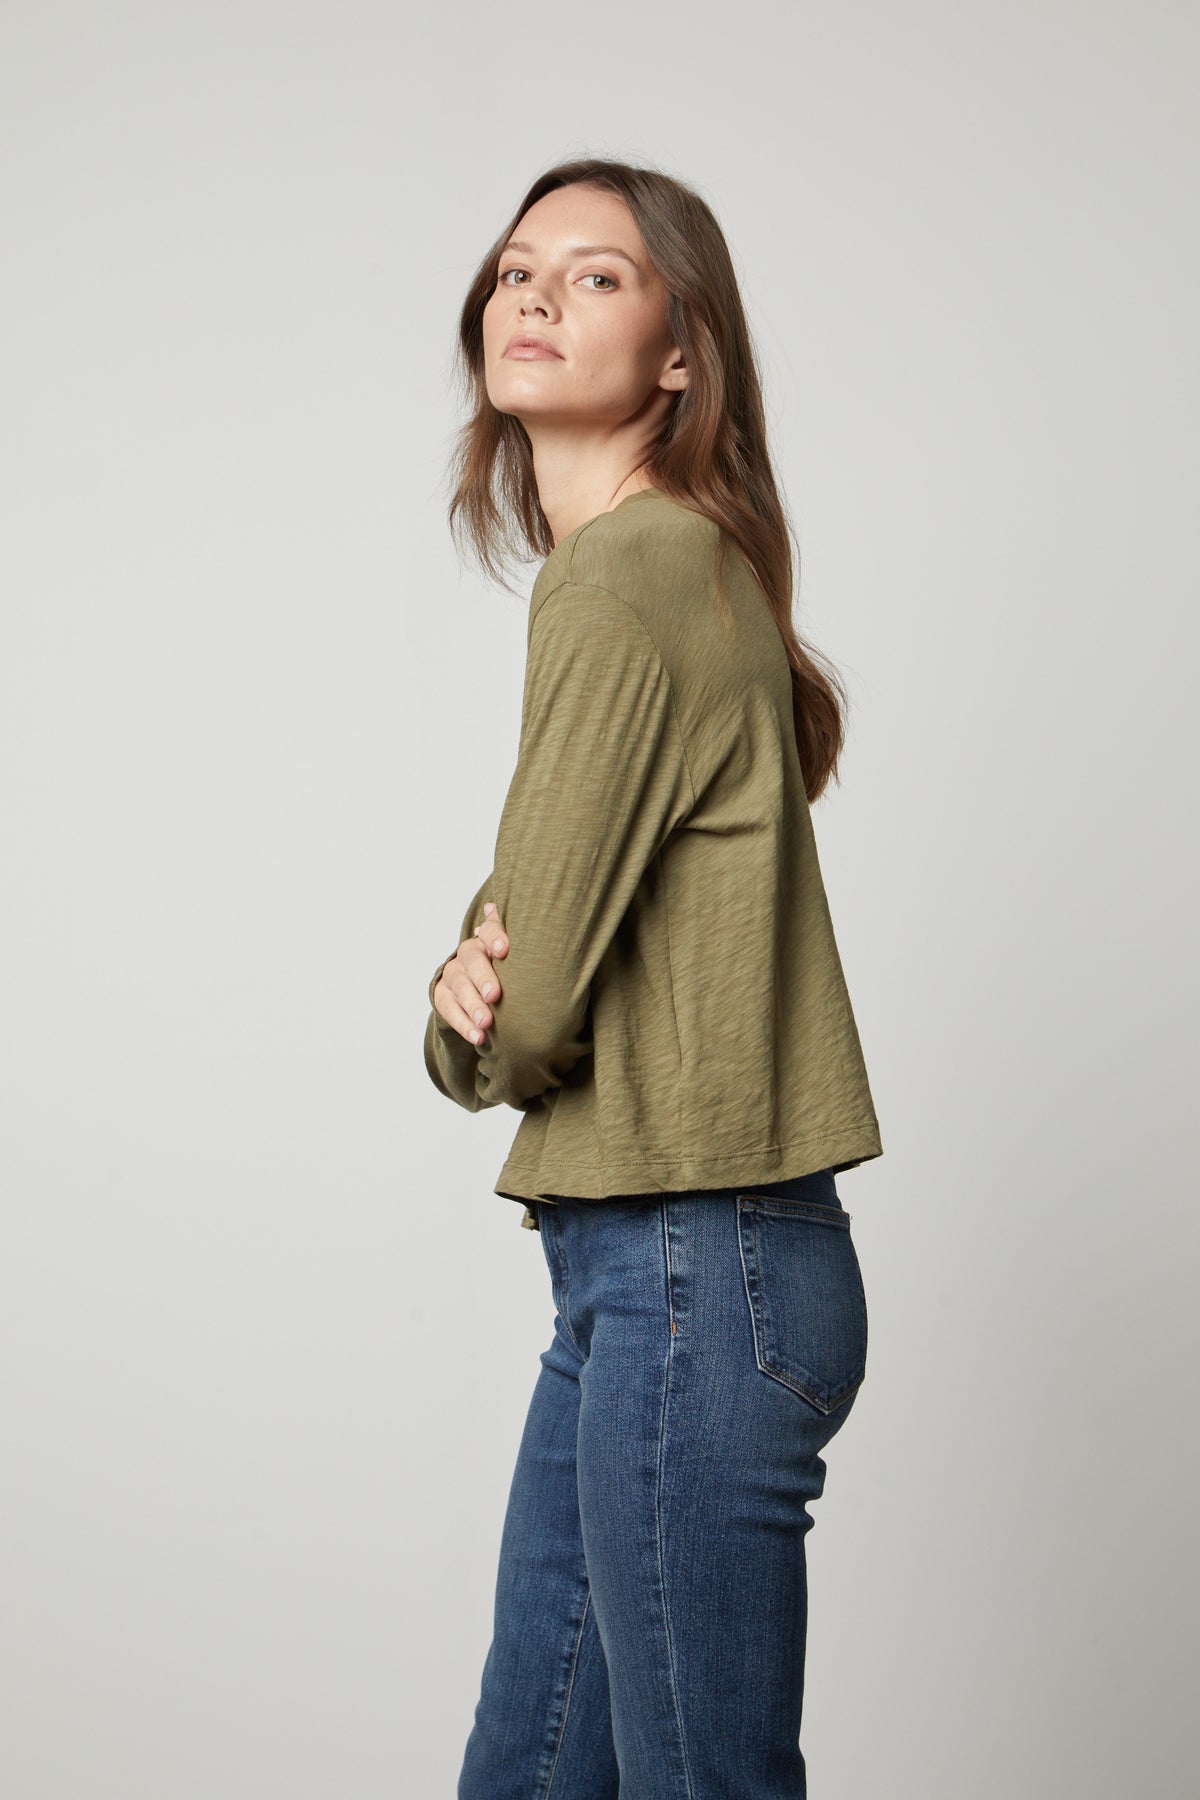   The model is wearing Velvet by Graham & Spencer jeans and a HEATHER CREW NECK CROPPED TEE in olive green. 